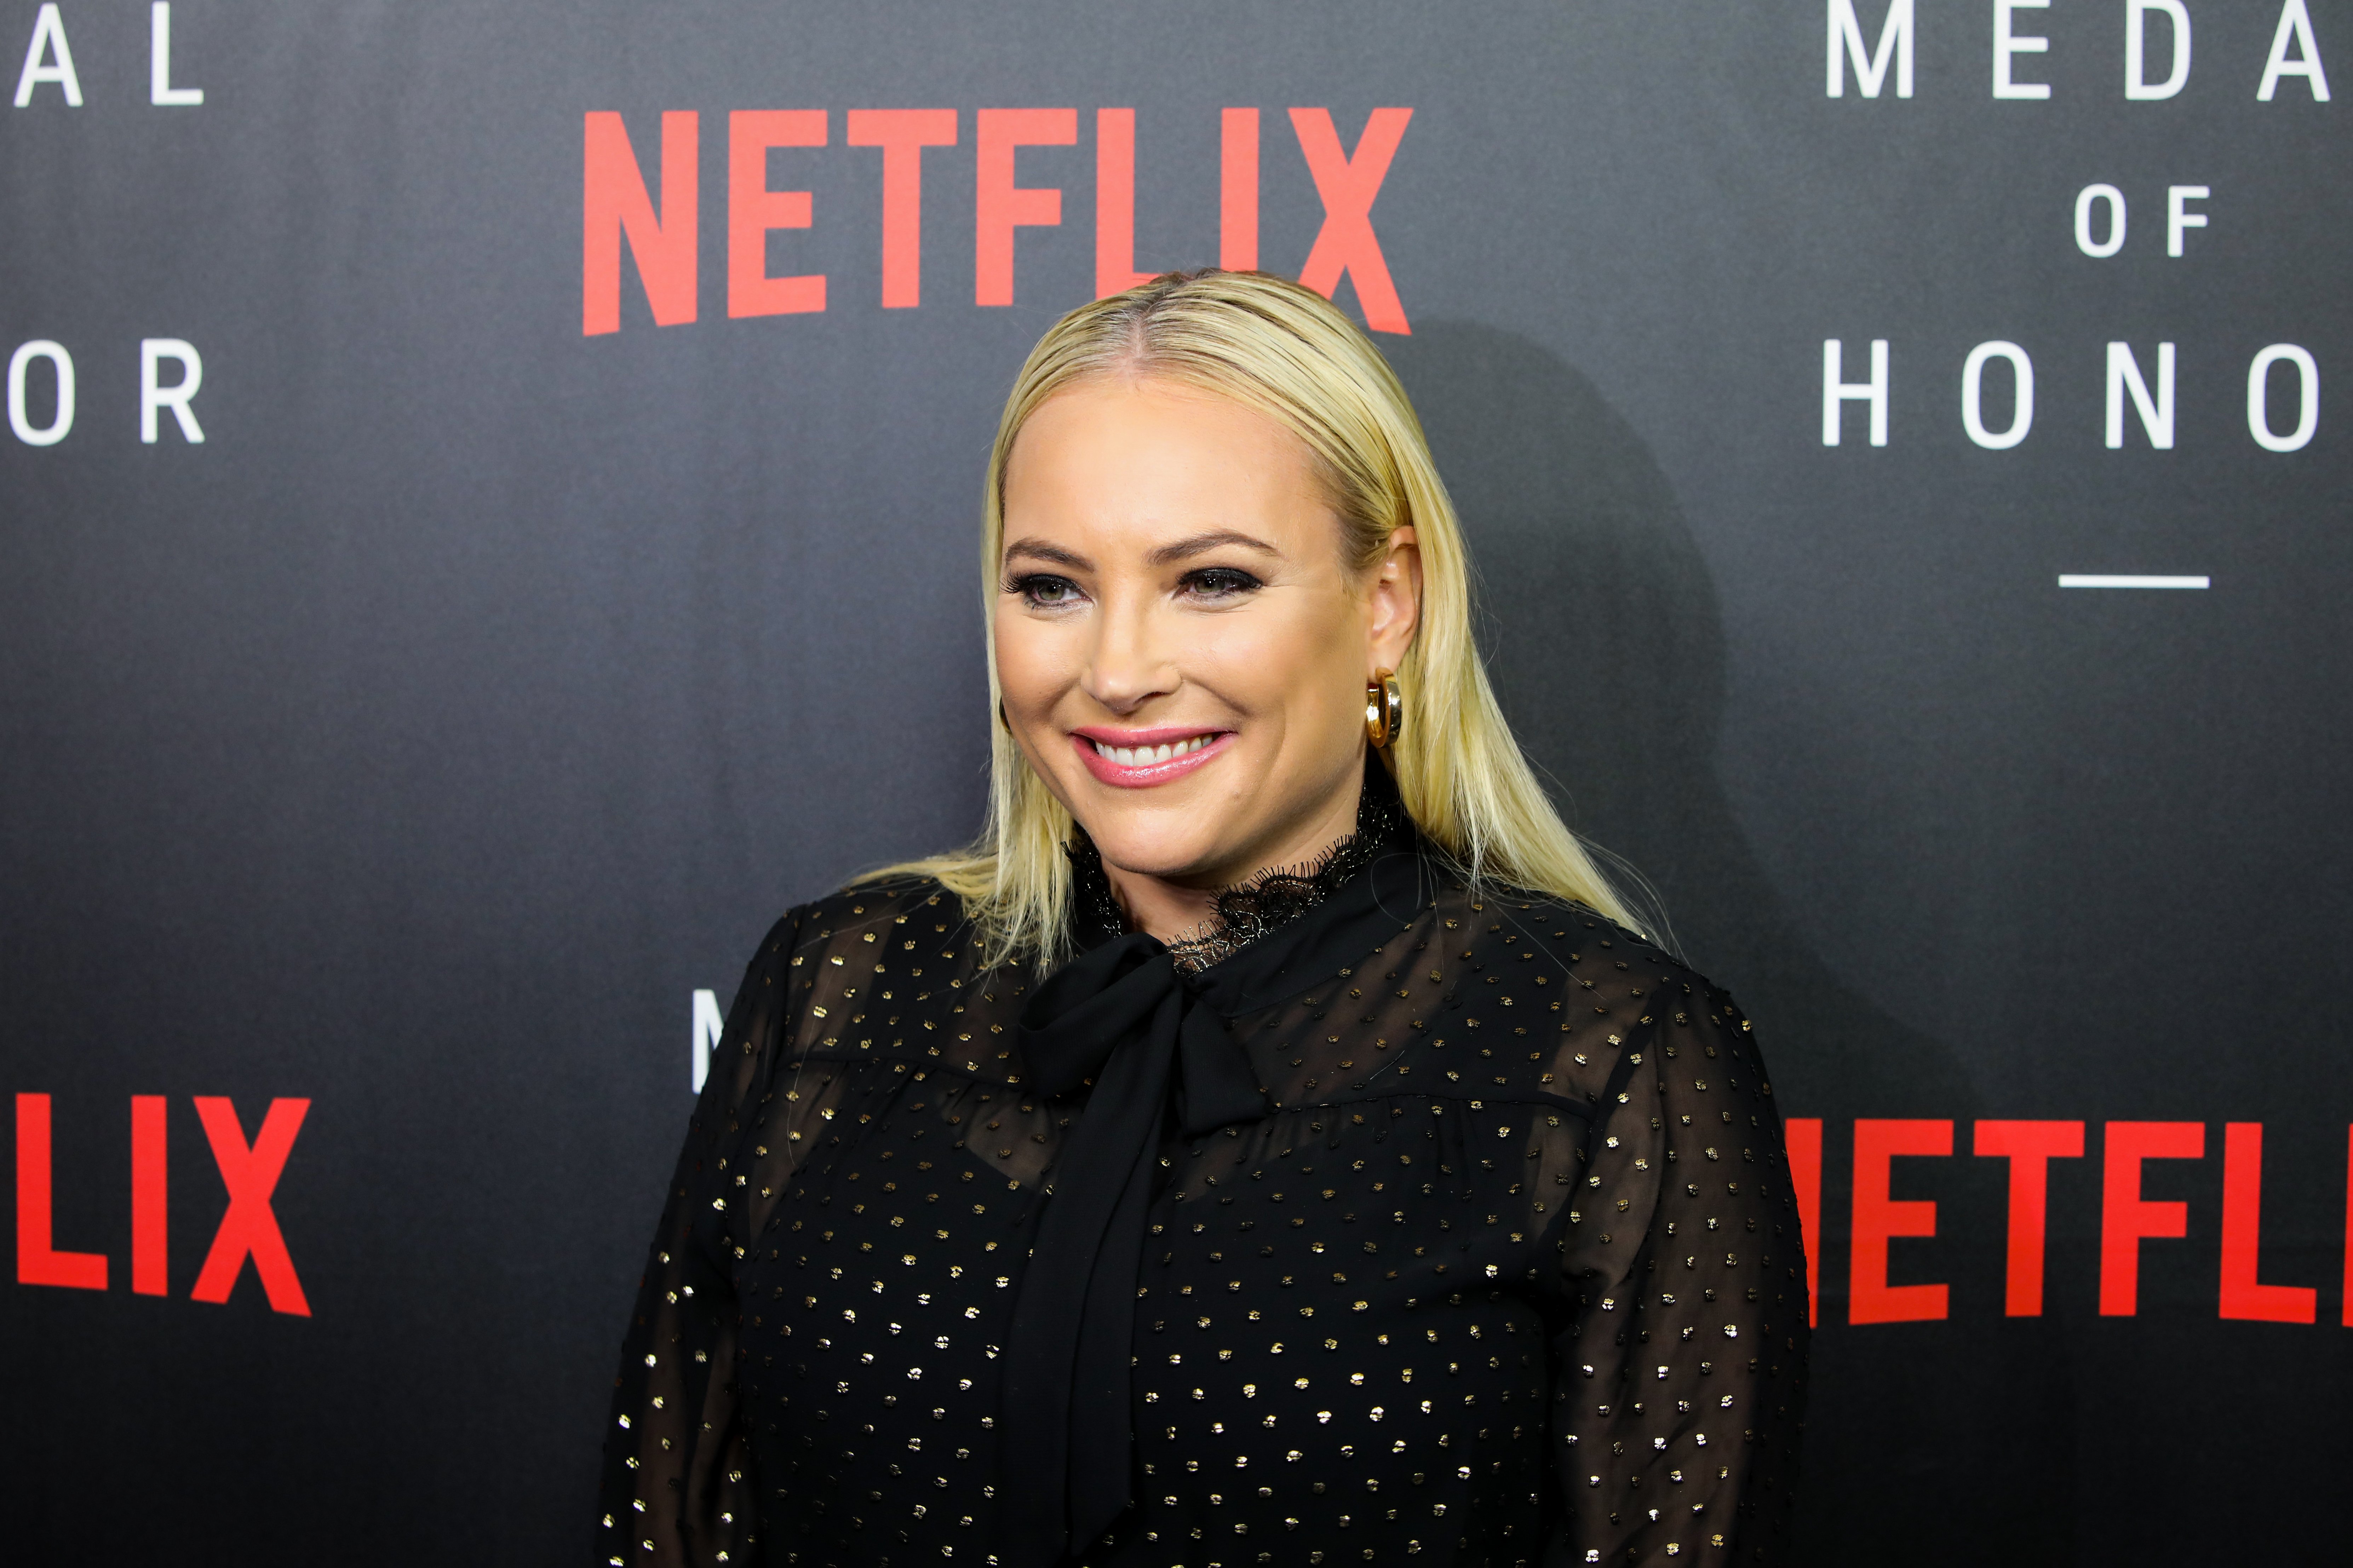 Meghan McCain attend the Netflix "Medal of Honor" screening and panel discussion at the US Navy Memorial Burke Theater on November 13, 2018, in Washington, D.C. | Source: Getty Images 